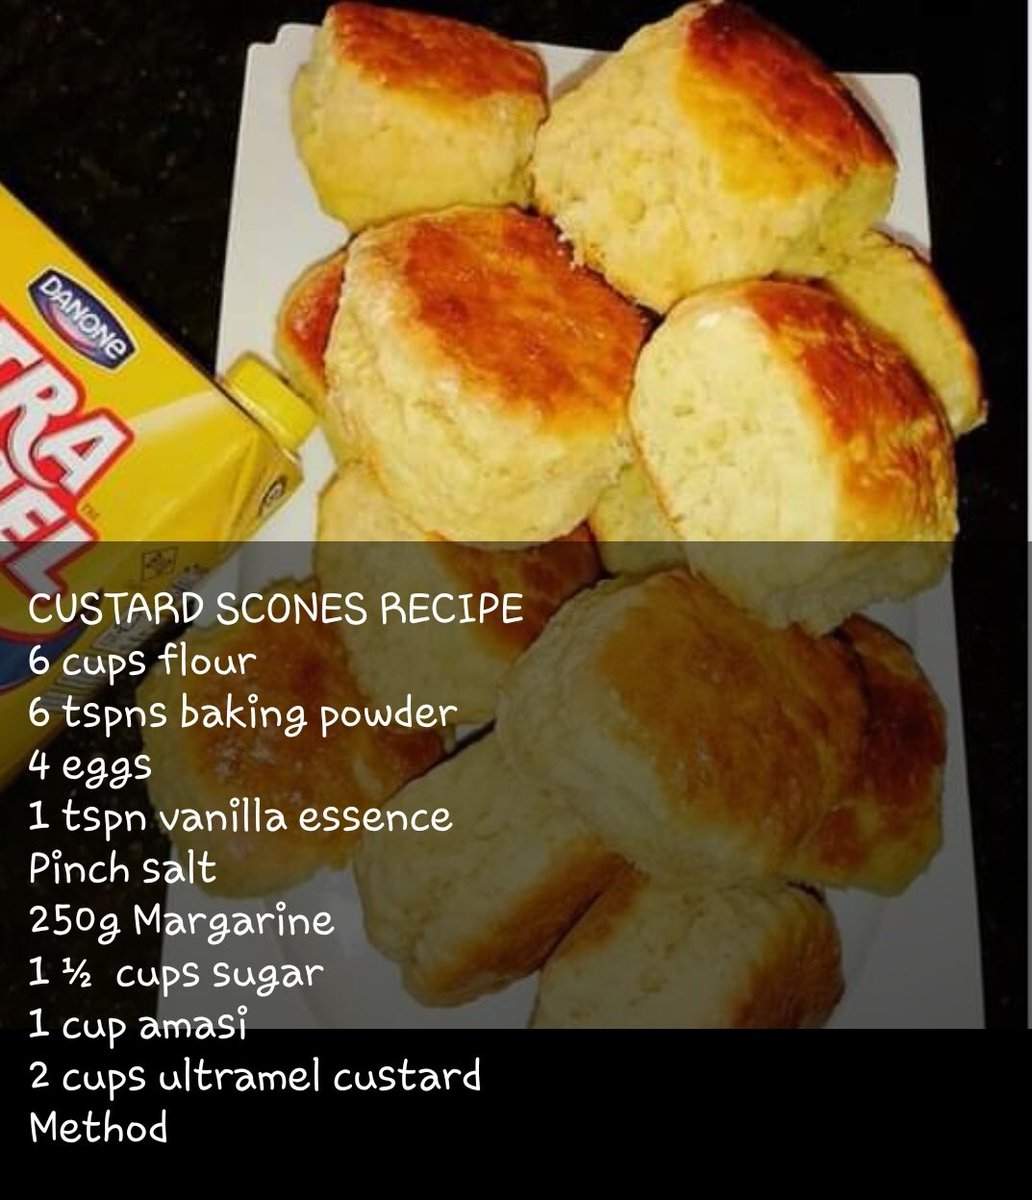 How To Make Scones With Amasi And Custard